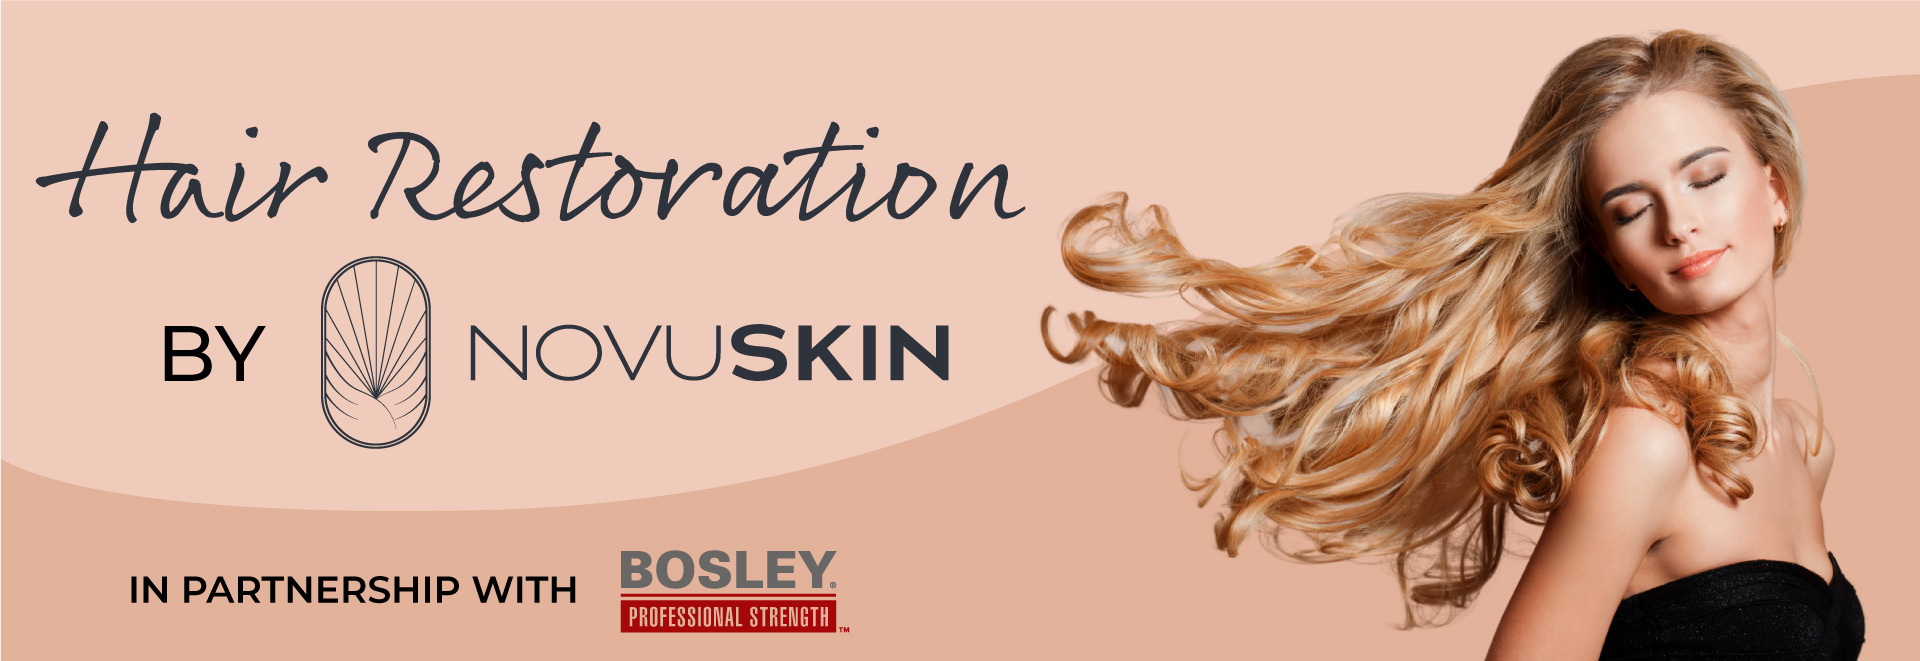 hair restoration by novuskin in partnership with bosely